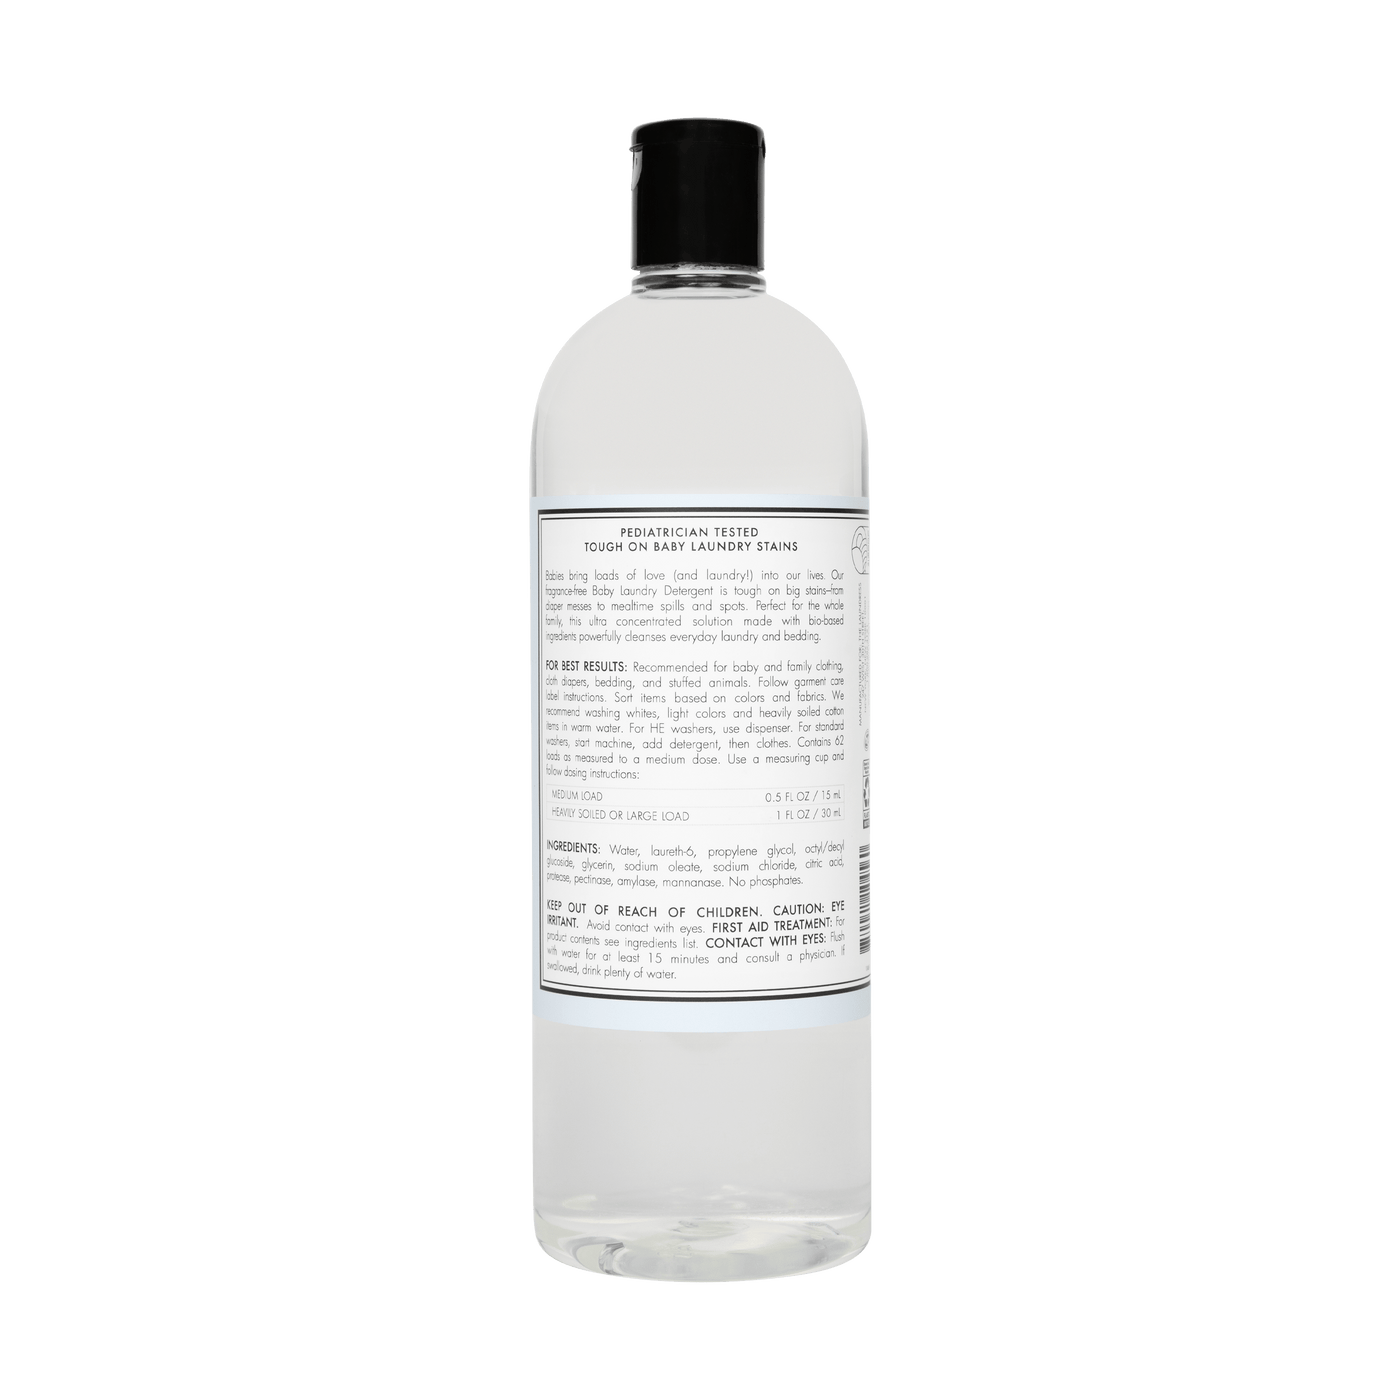 Fragrance Free Baby Laundry Detergent 32oz The Laundress